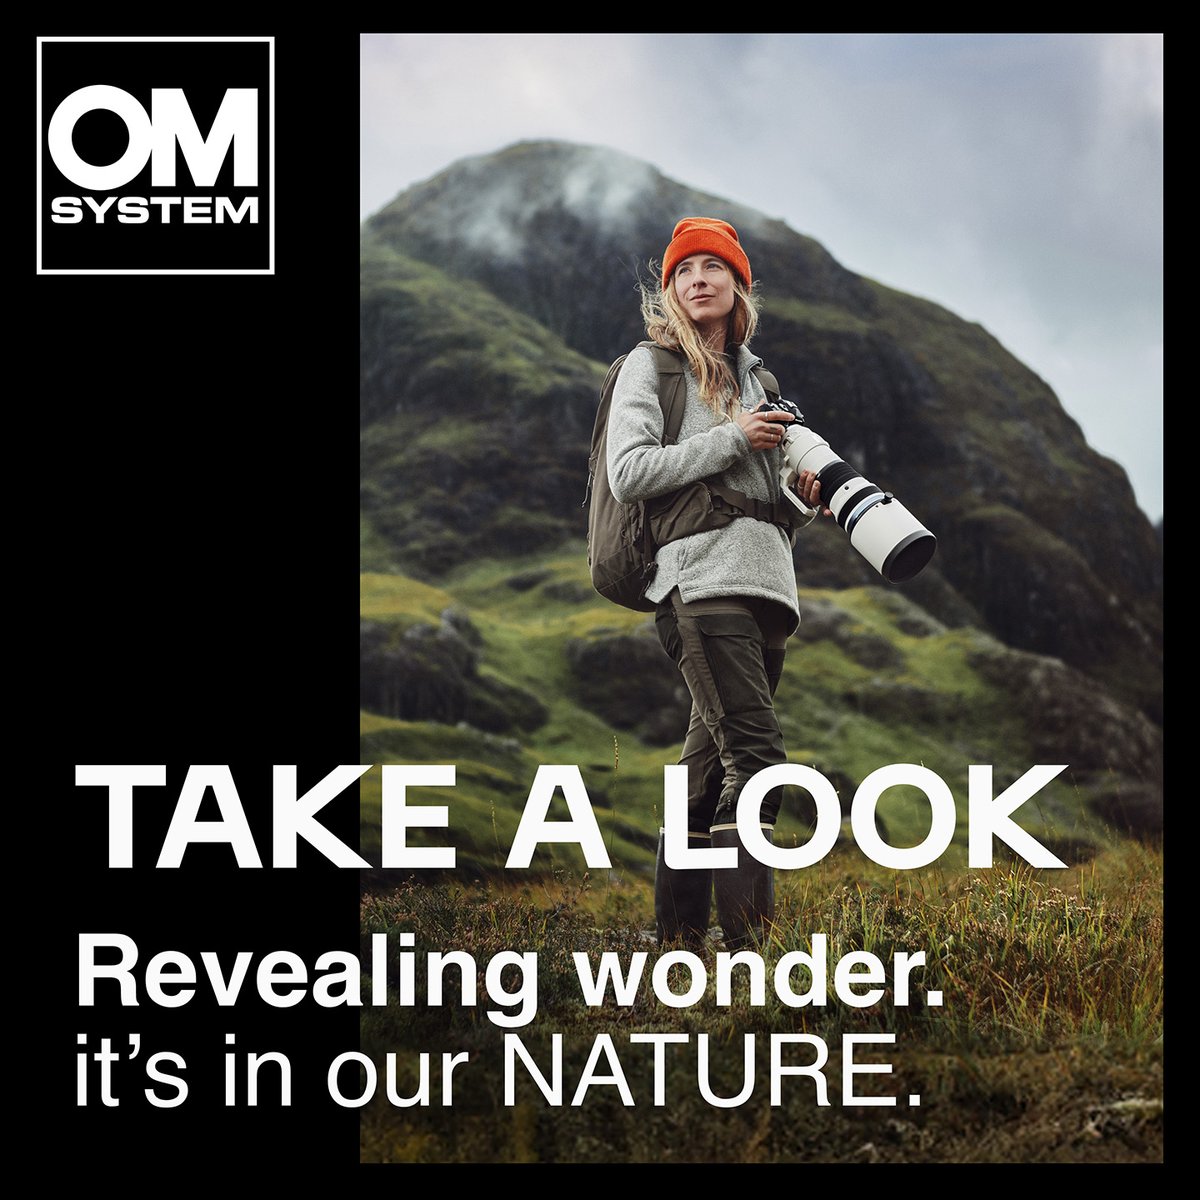 Happening now! 🚀 OM SYSTEM launch, Mar 1st '24, 11am-4pm PST, Action Camera Roseville, CA! Unveiling OM-1 Mark II, M.Zuiko 150-600mm & 9-18mm lenses. Exclusive pre-order deals! Joel Quiggin to demo new features. Don't Miss Out! 📷 #OMSystem #NewProductAlert @OMSYSTEMcameras